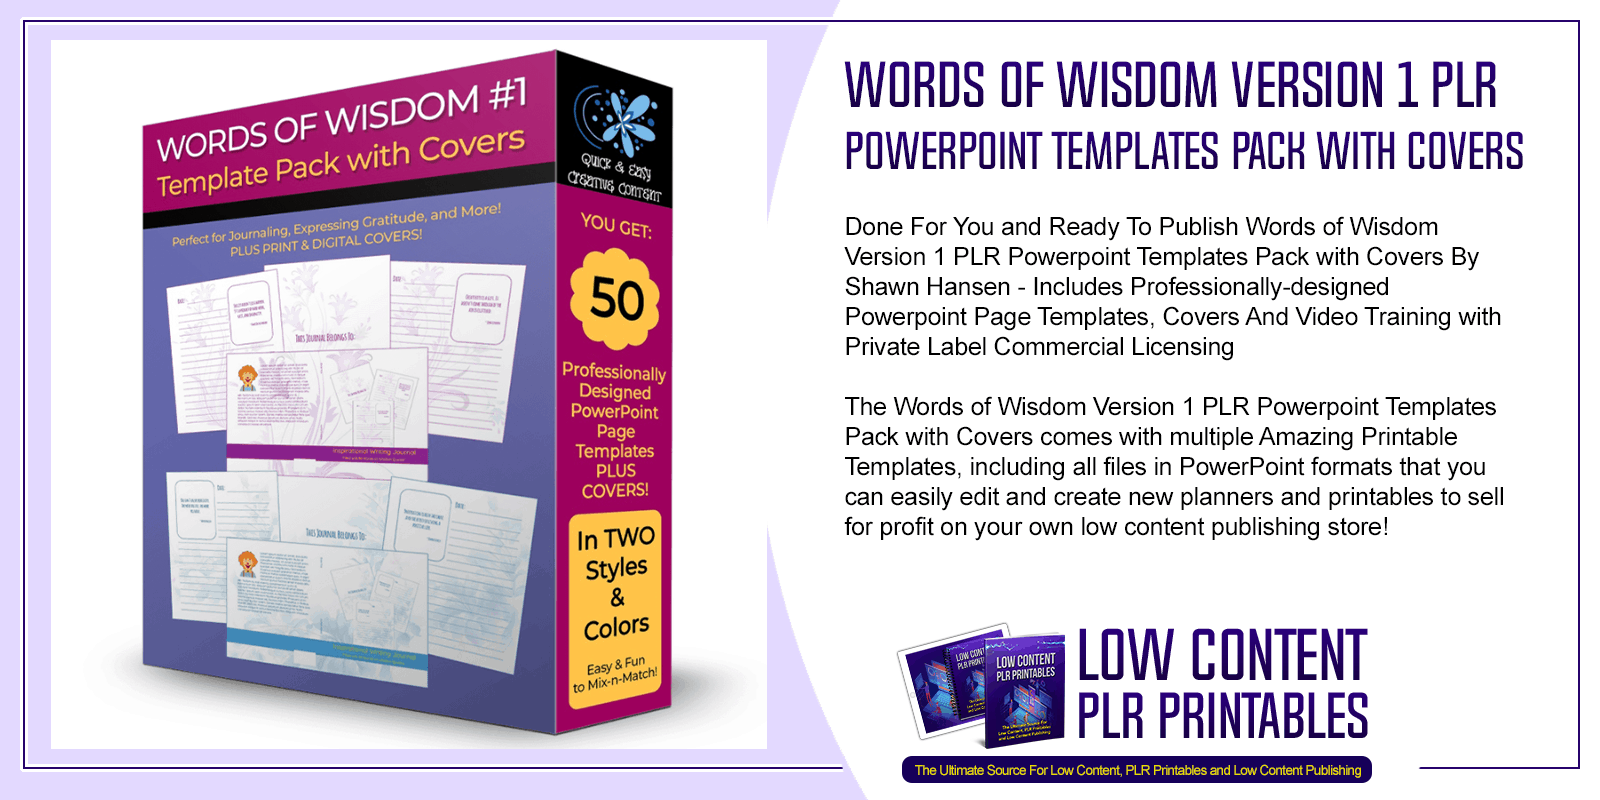 Words of Wisdom Version 1 PLR Powerpoint Templates Pack with Covers